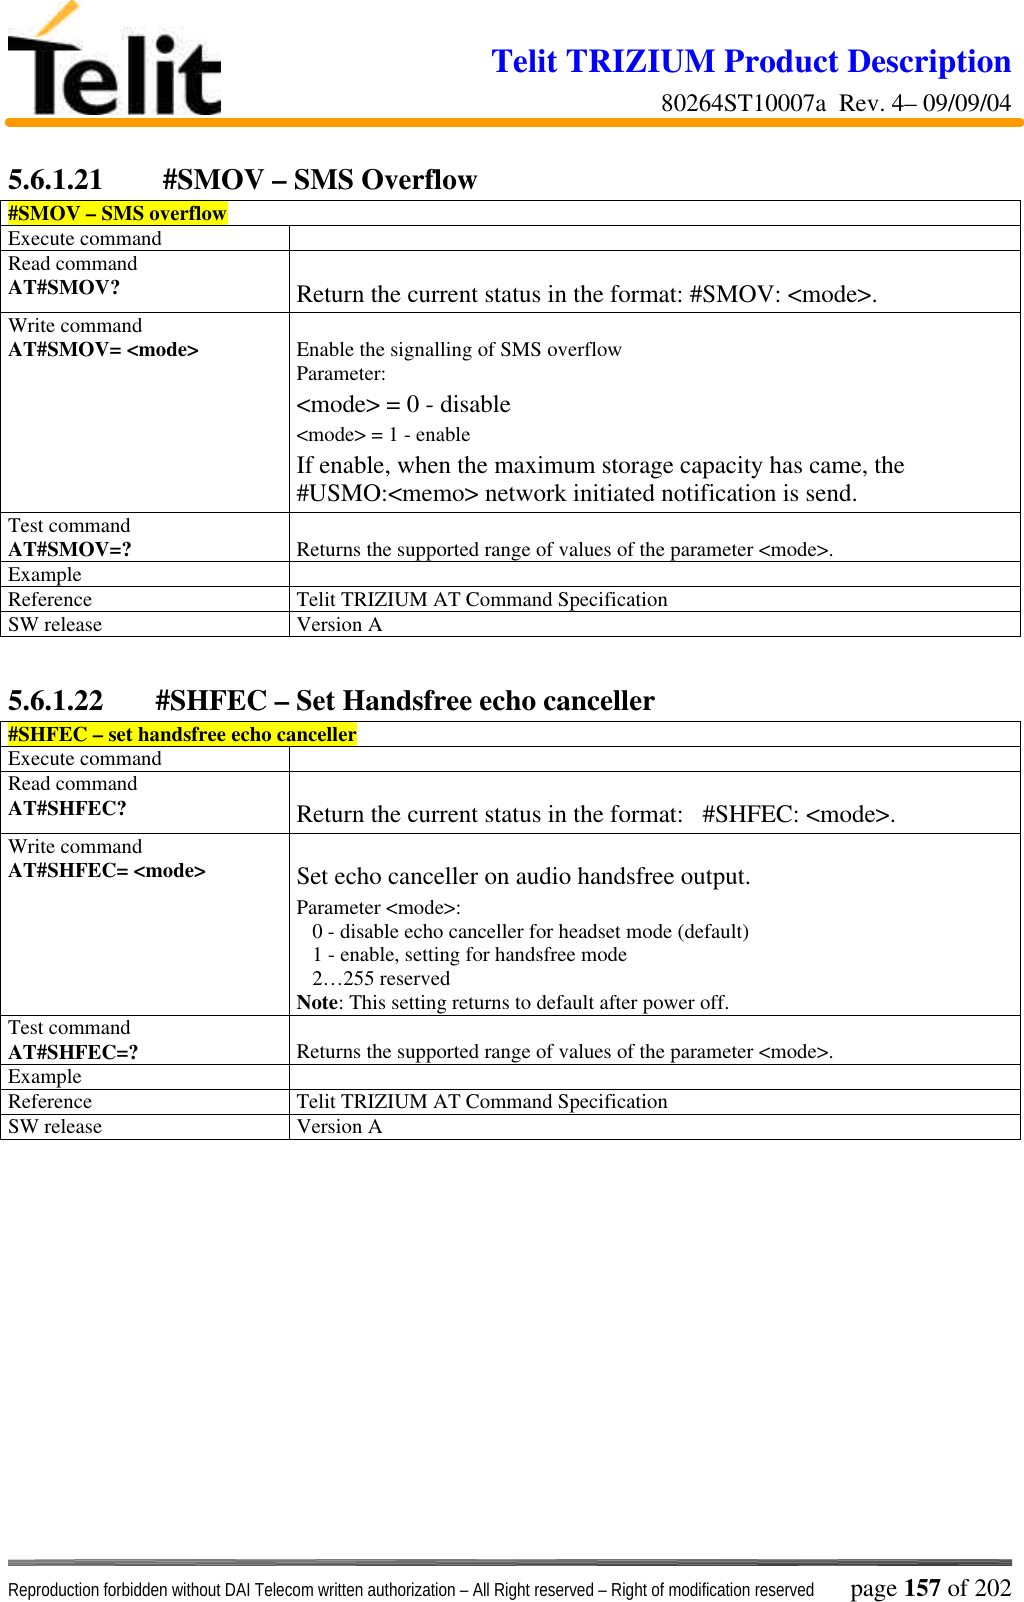 Telit TRIZIUM Product Description80264ST10007a  Rev. 4– 09/09/04Reproduction forbidden without DAI Telecom written authorization – All Right reserved – Right of modification reserved page 157 of 2025.6.1.21  #SMOV – SMS Overflow#SMOV – SMS overflowExecute commandRead commandAT#SMOV? Return the current status in the format: #SMOV: &lt;mode&gt;.Write commandAT#SMOV= &lt;mode&gt; Enable the signalling of SMS overflowParameter:&lt;mode&gt; = 0 - disable&lt;mode&gt; = 1 - enableIf enable, when the maximum storage capacity has came, the#USMO:&lt;memo&gt; network initiated notification is send.Test commandAT#SMOV=? Returns the supported range of values of the parameter &lt;mode&gt;.ExampleReference Telit TRIZIUM AT Command SpecificationSW release Version A5.6.1.22 #SHFEC – Set Handsfree echo canceller#SHFEC – set handsfree echo cancellerExecute commandRead commandAT#SHFEC? Return the current status in the format:   #SHFEC: &lt;mode&gt;.Write commandAT#SHFEC= &lt;mode&gt; Set echo canceller on audio handsfree output.Parameter &lt;mode&gt;:   0 - disable echo canceller for headset mode (default)   1 - enable, setting for handsfree mode   2…255 reserved Note: This setting returns to default after power off.Test commandAT#SHFEC=? Returns the supported range of values of the parameter &lt;mode&gt;.ExampleReference Telit TRIZIUM AT Command SpecificationSW release Version A